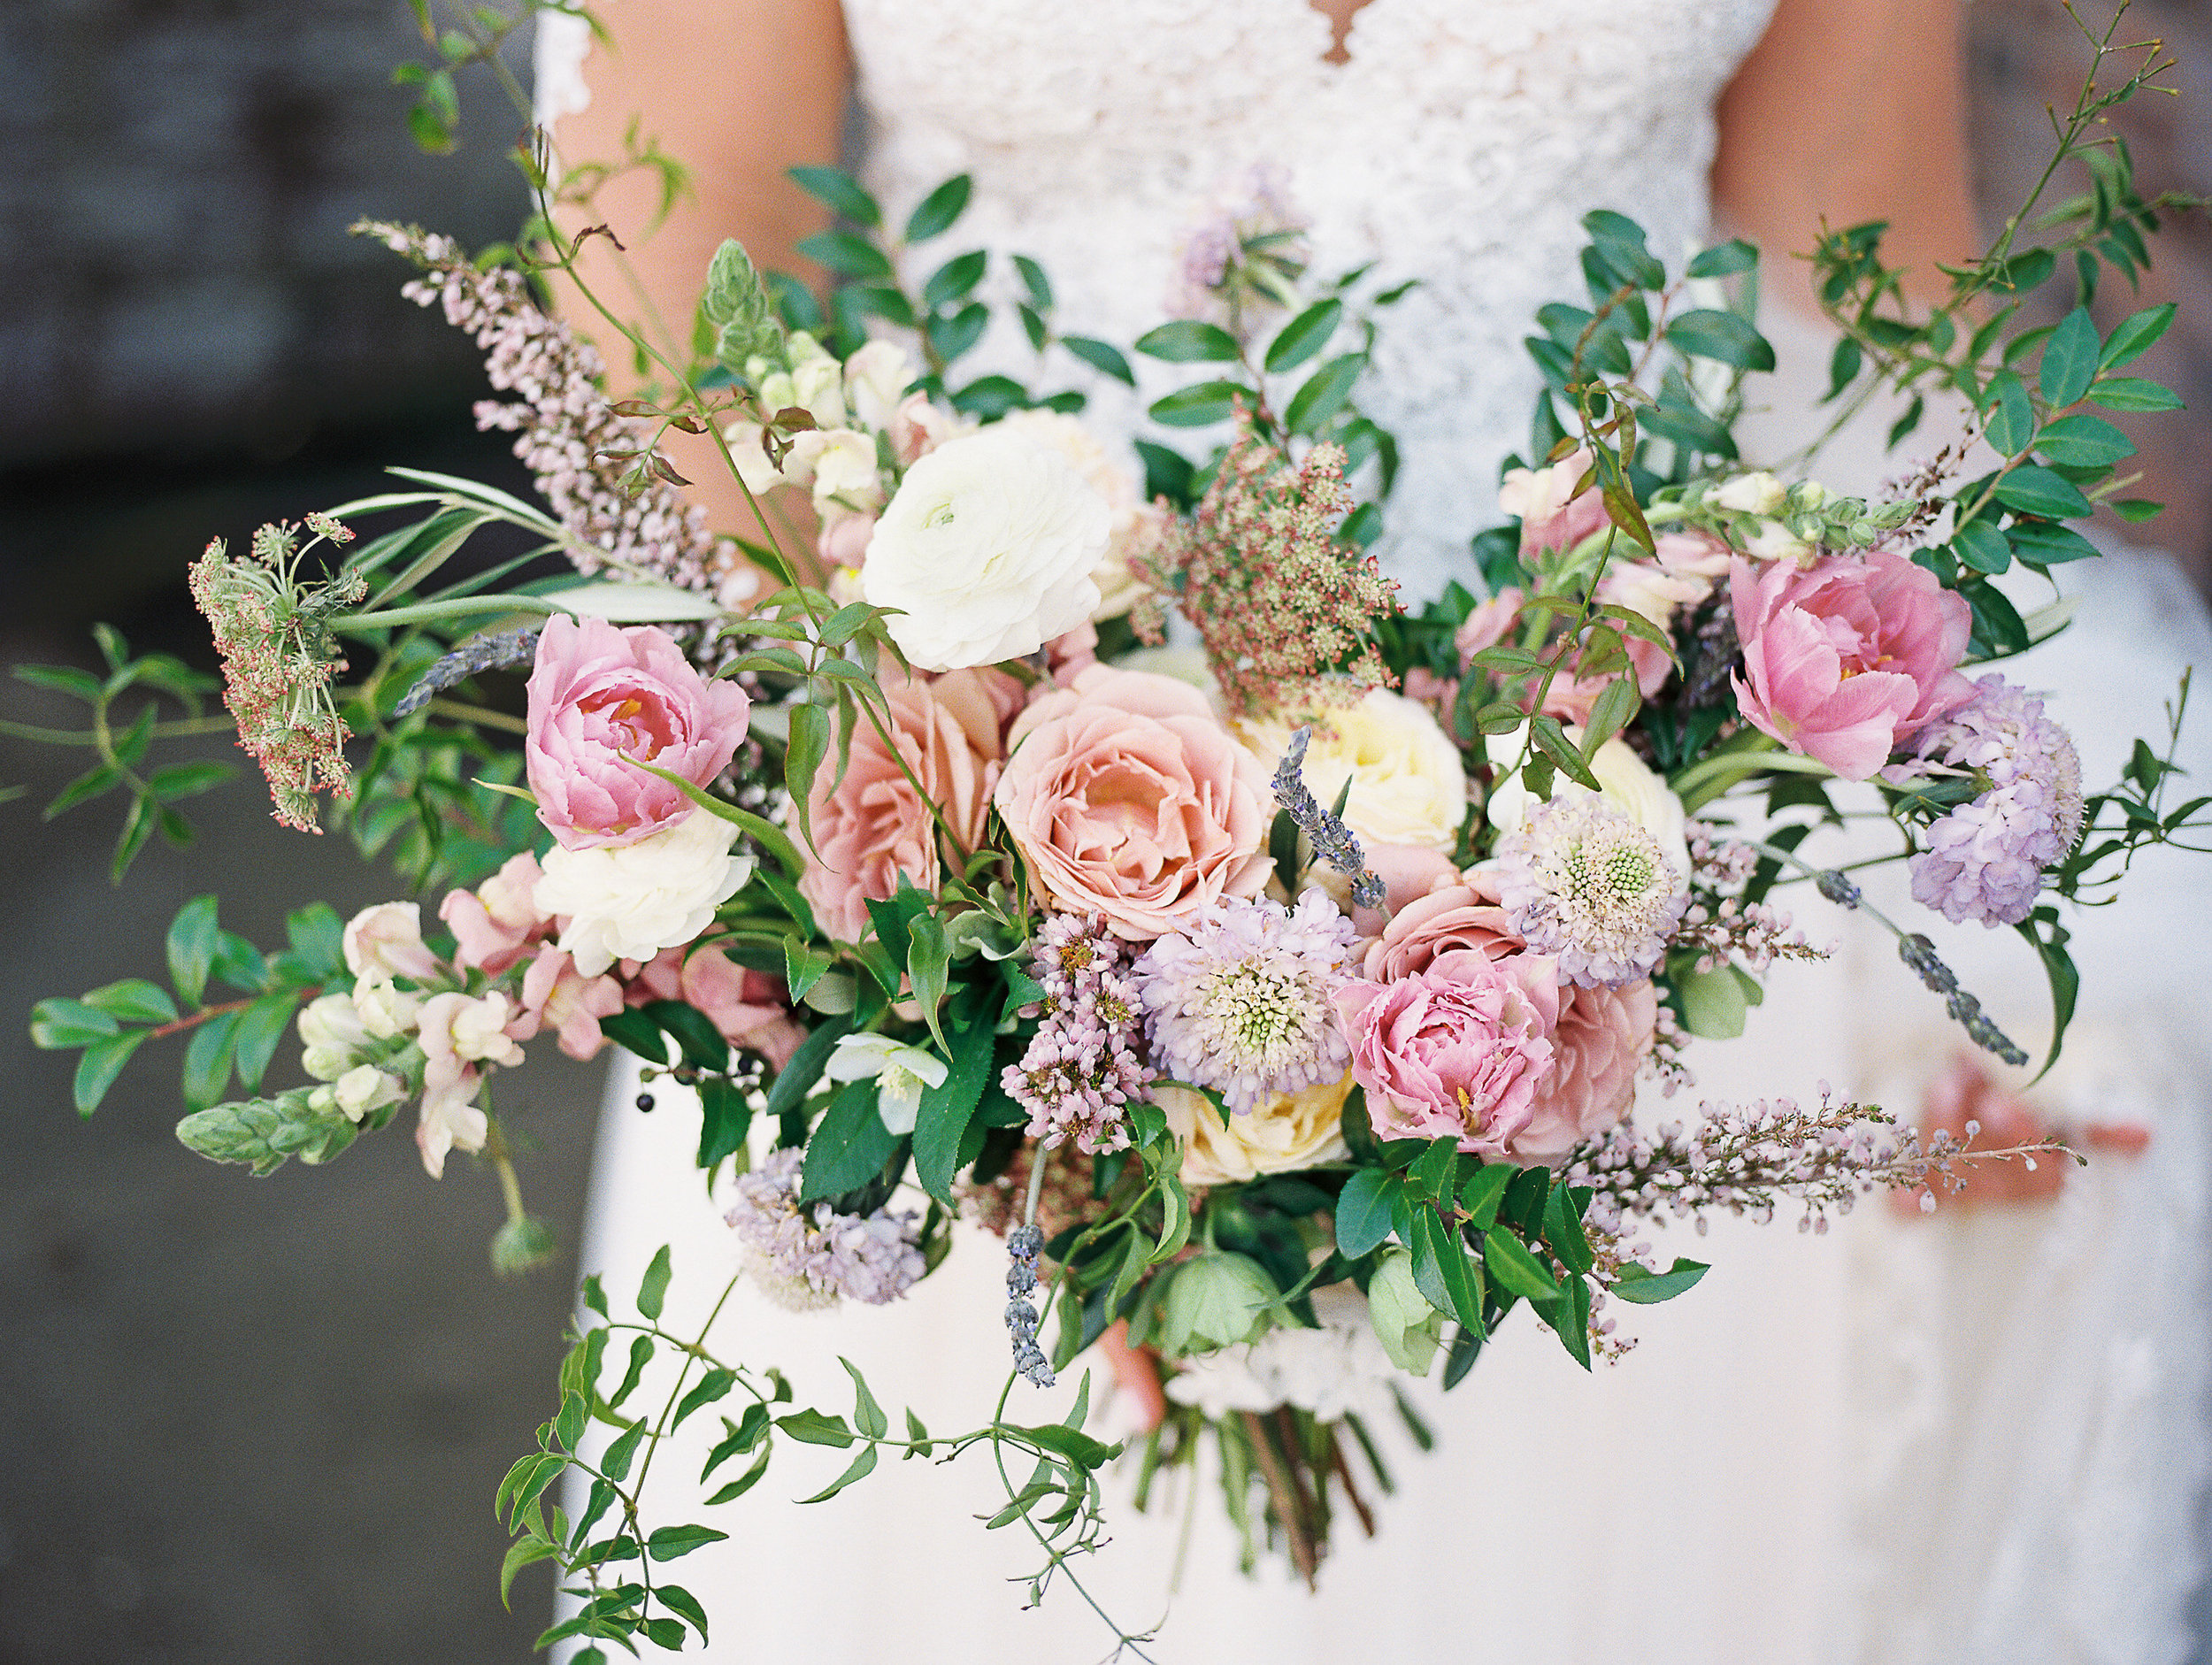 Natural, lush bridal bouquet with garden roses, ranunculus, and greenery // Nashville Wedding Floral Design